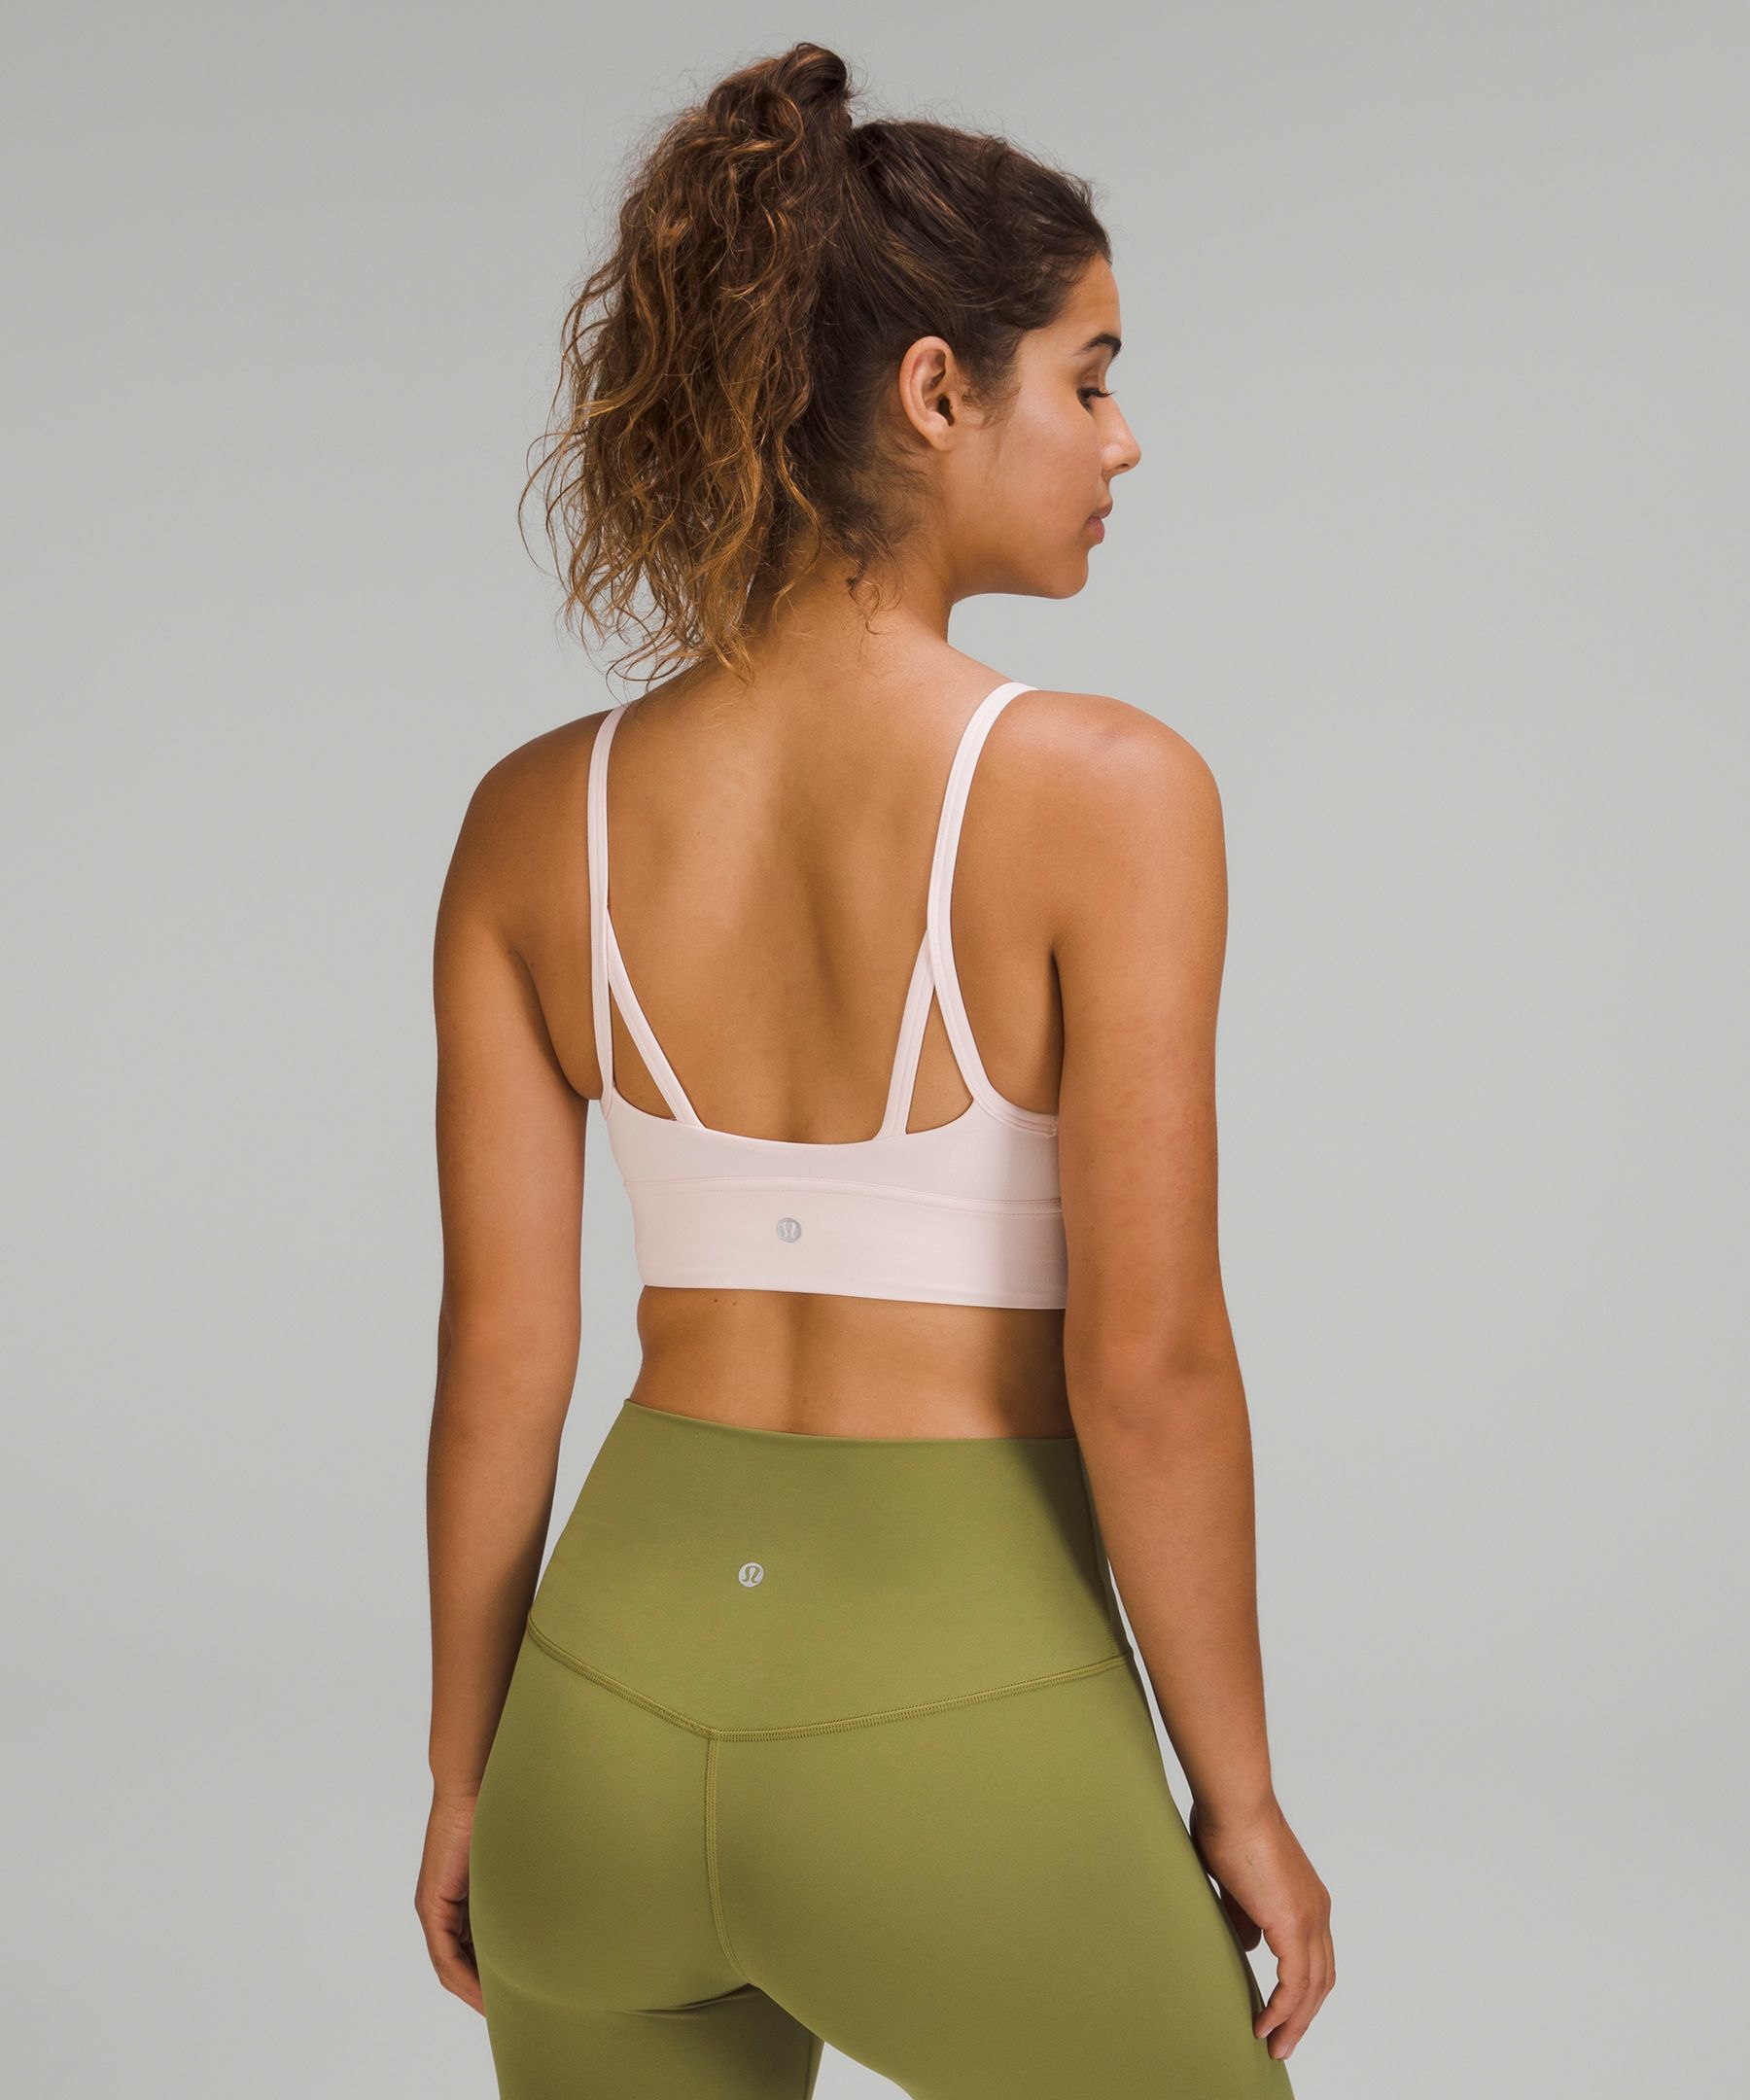 cutest set from wmtm 🙂 nulu front gather yoga bra + 25” aligns in